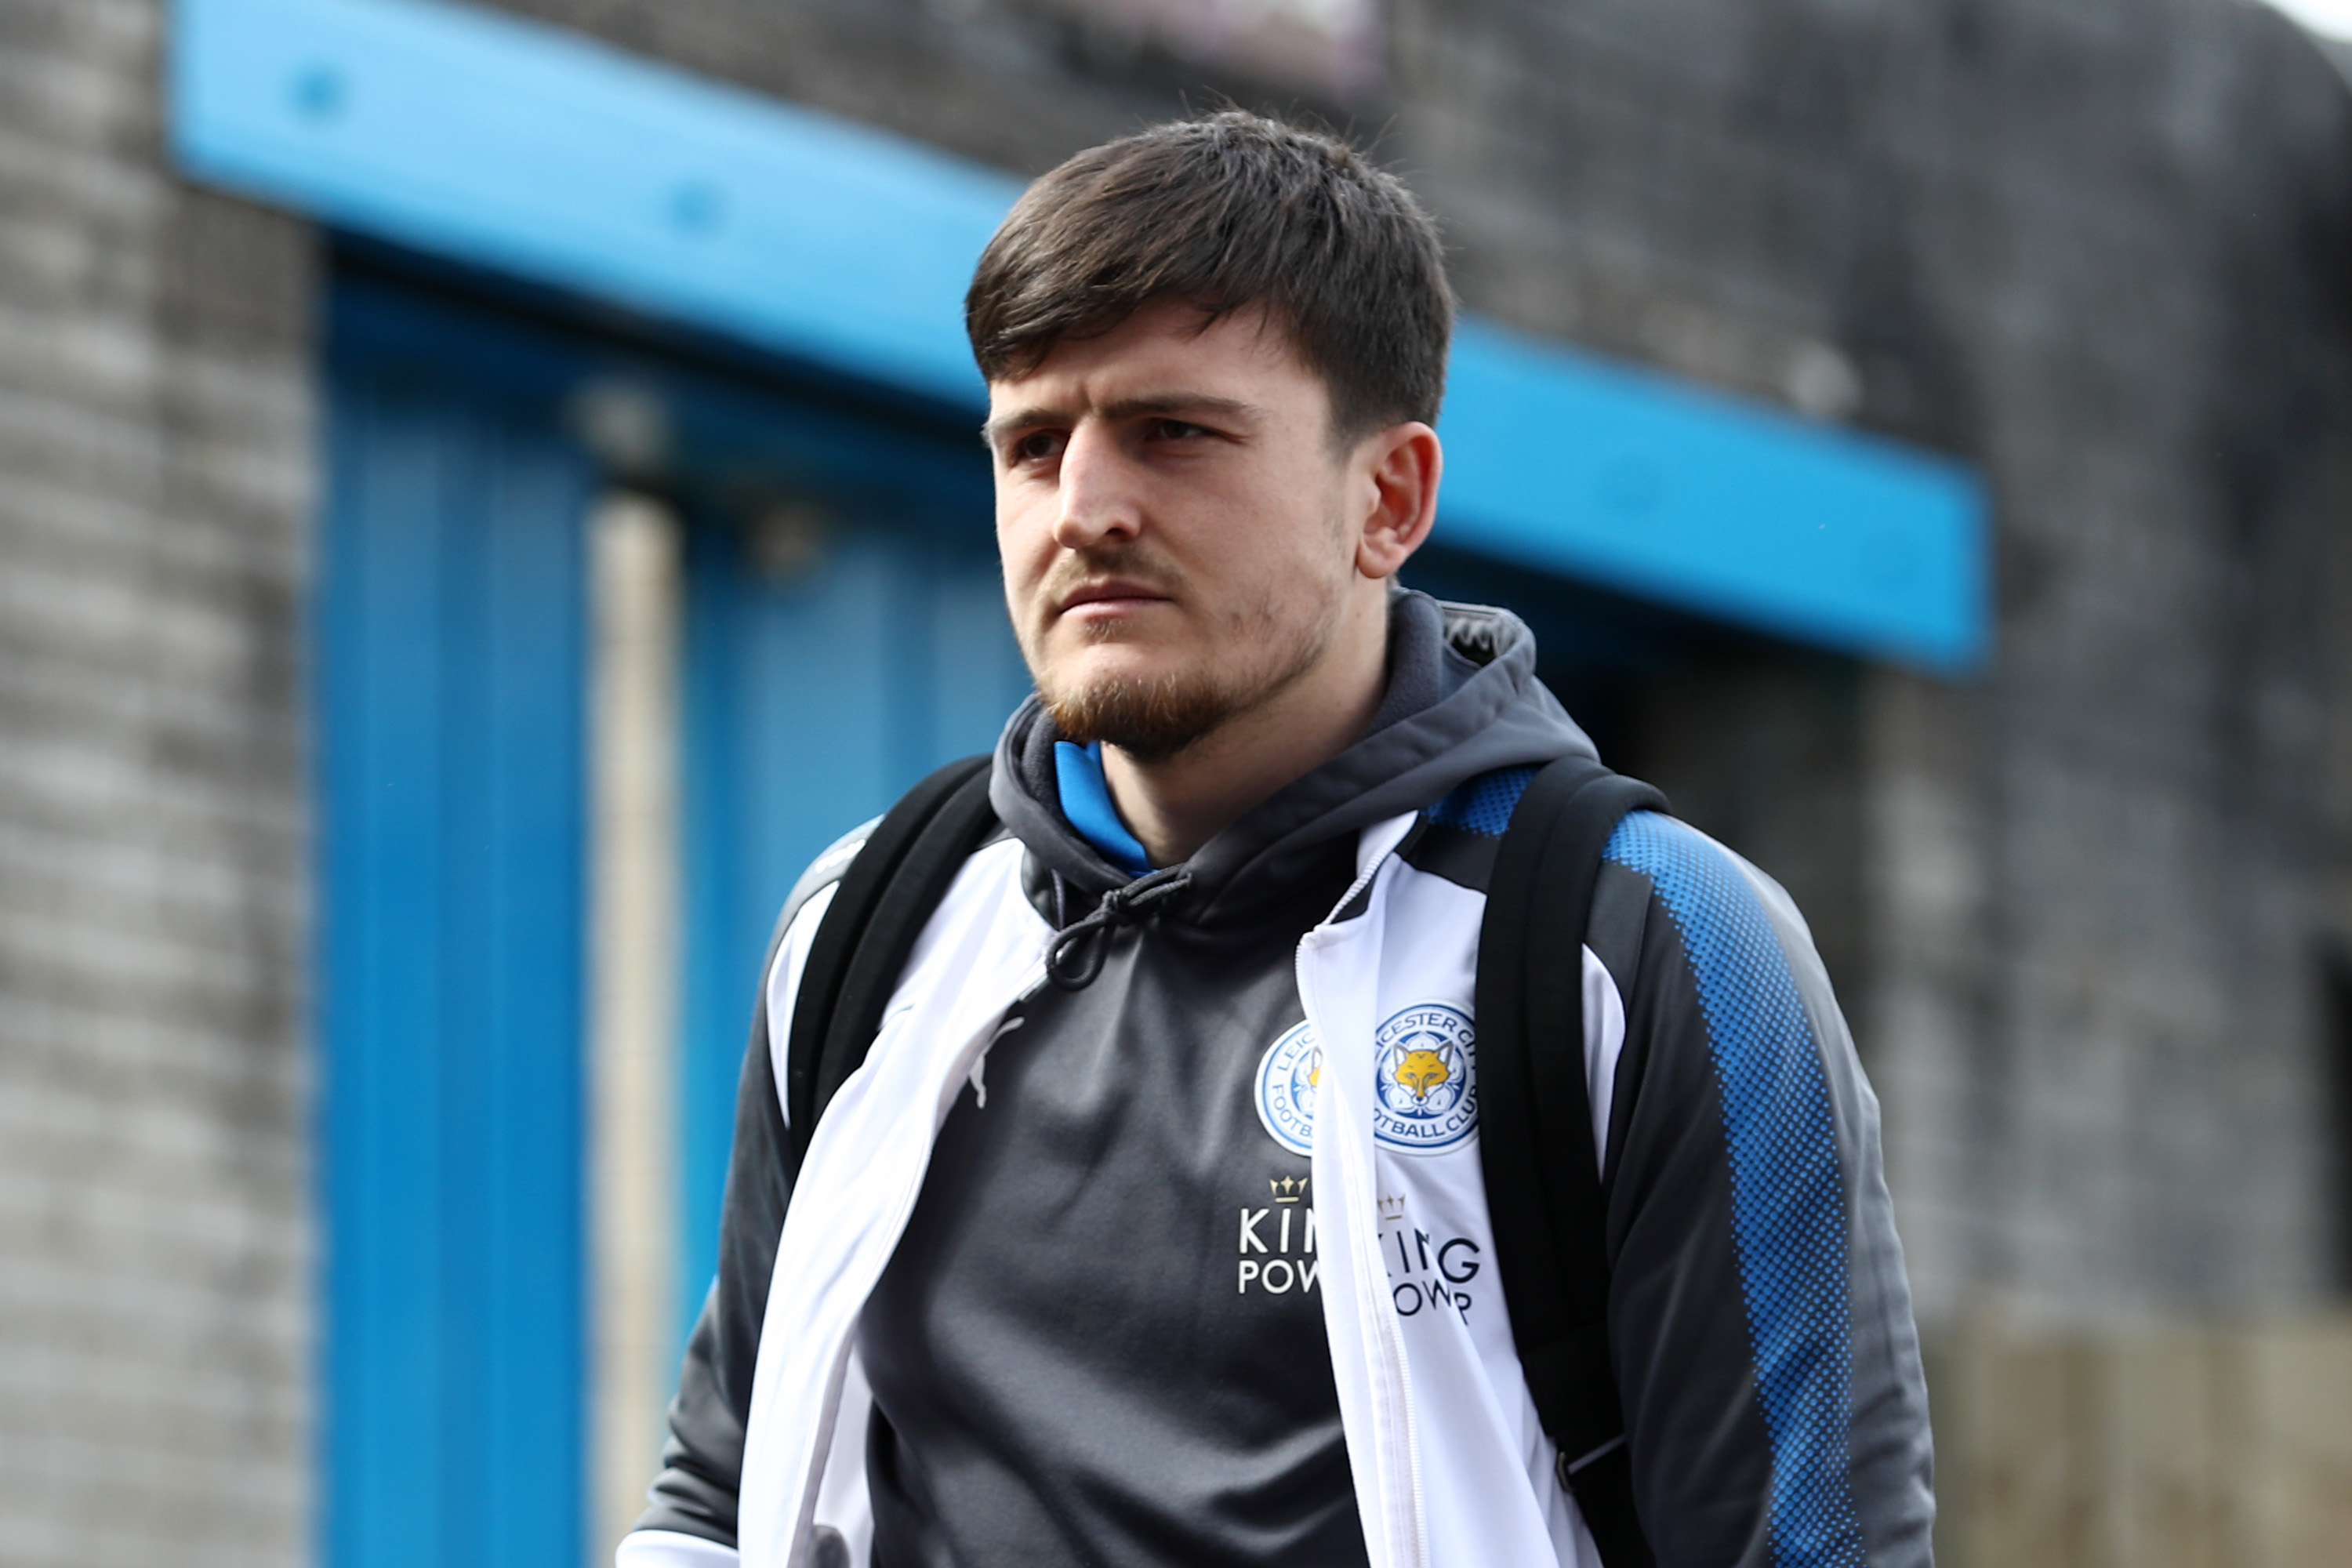 BURNLEY, ENGLAND - APRIL 14:  Harry Maguire of Leicester City arrives at the stadium prior to the Premier League match between Burnley and Leicester City at Turf Moor on April 14, 2018 in Burnley, England.  (Photo by Matthew Lewis/Getty Images)